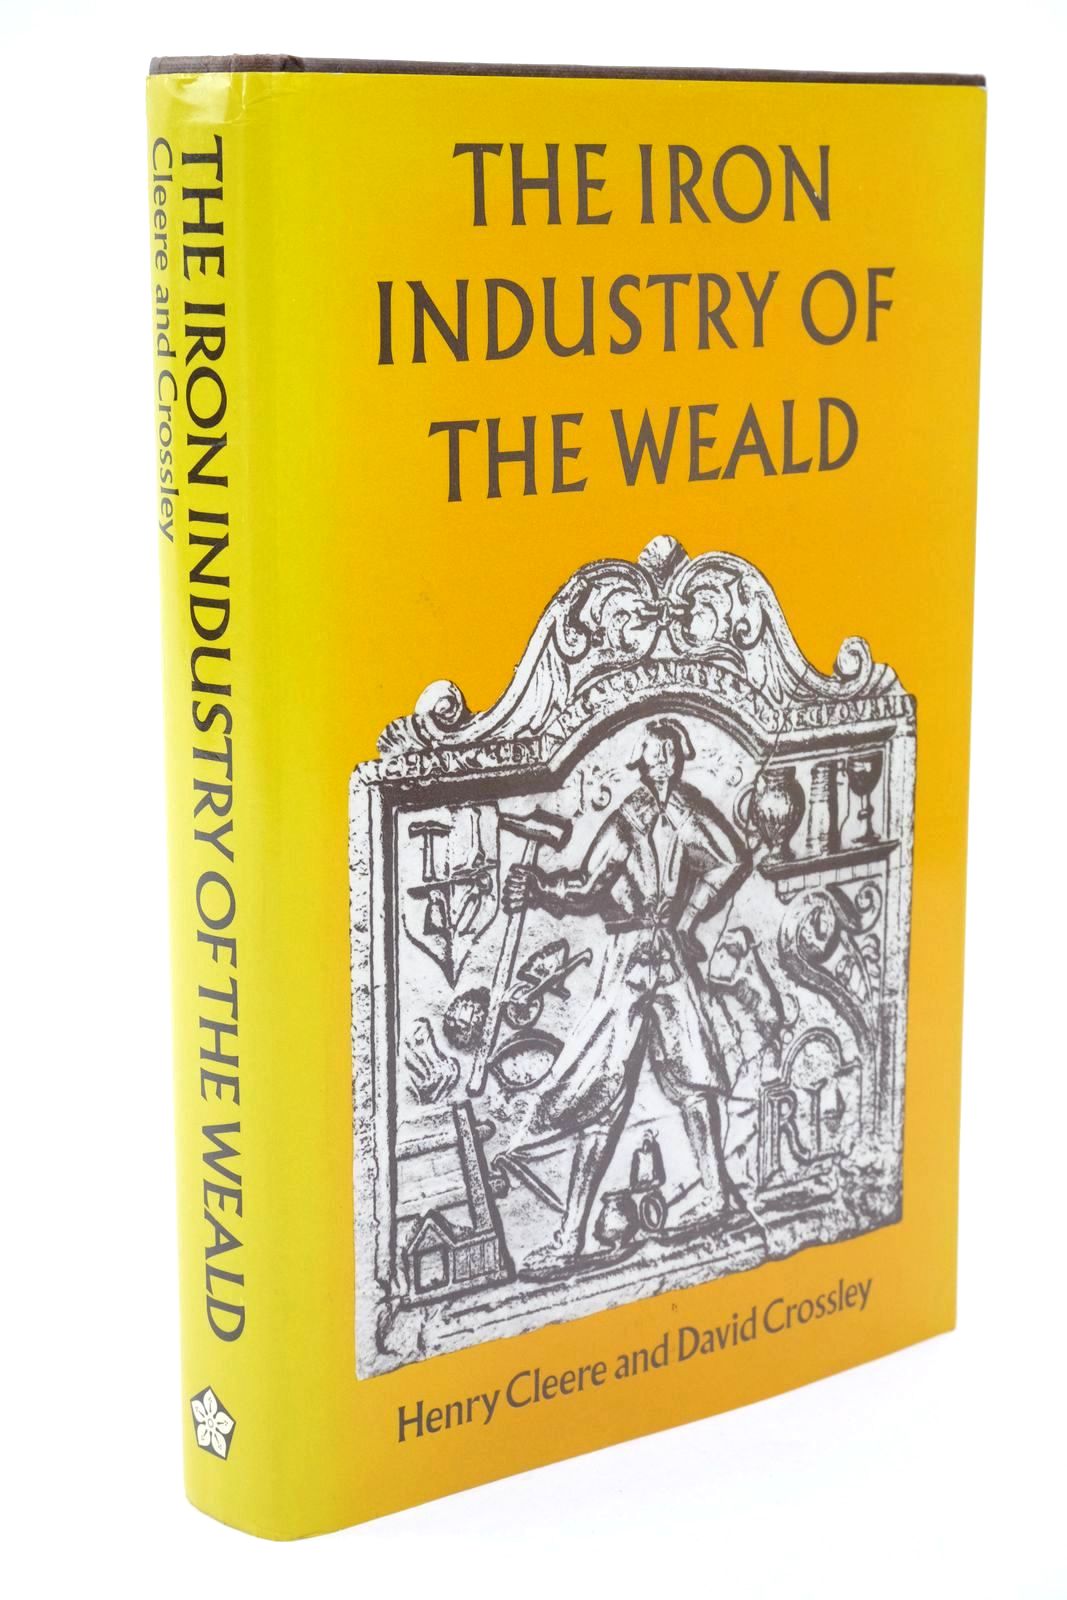 Photo of THE IRON INDUSTRY OF THE WEALD written by Cleere, Henry Crossley, David published by Leicester University Press (STOCK CODE: 1322505)  for sale by Stella & Rose's Books